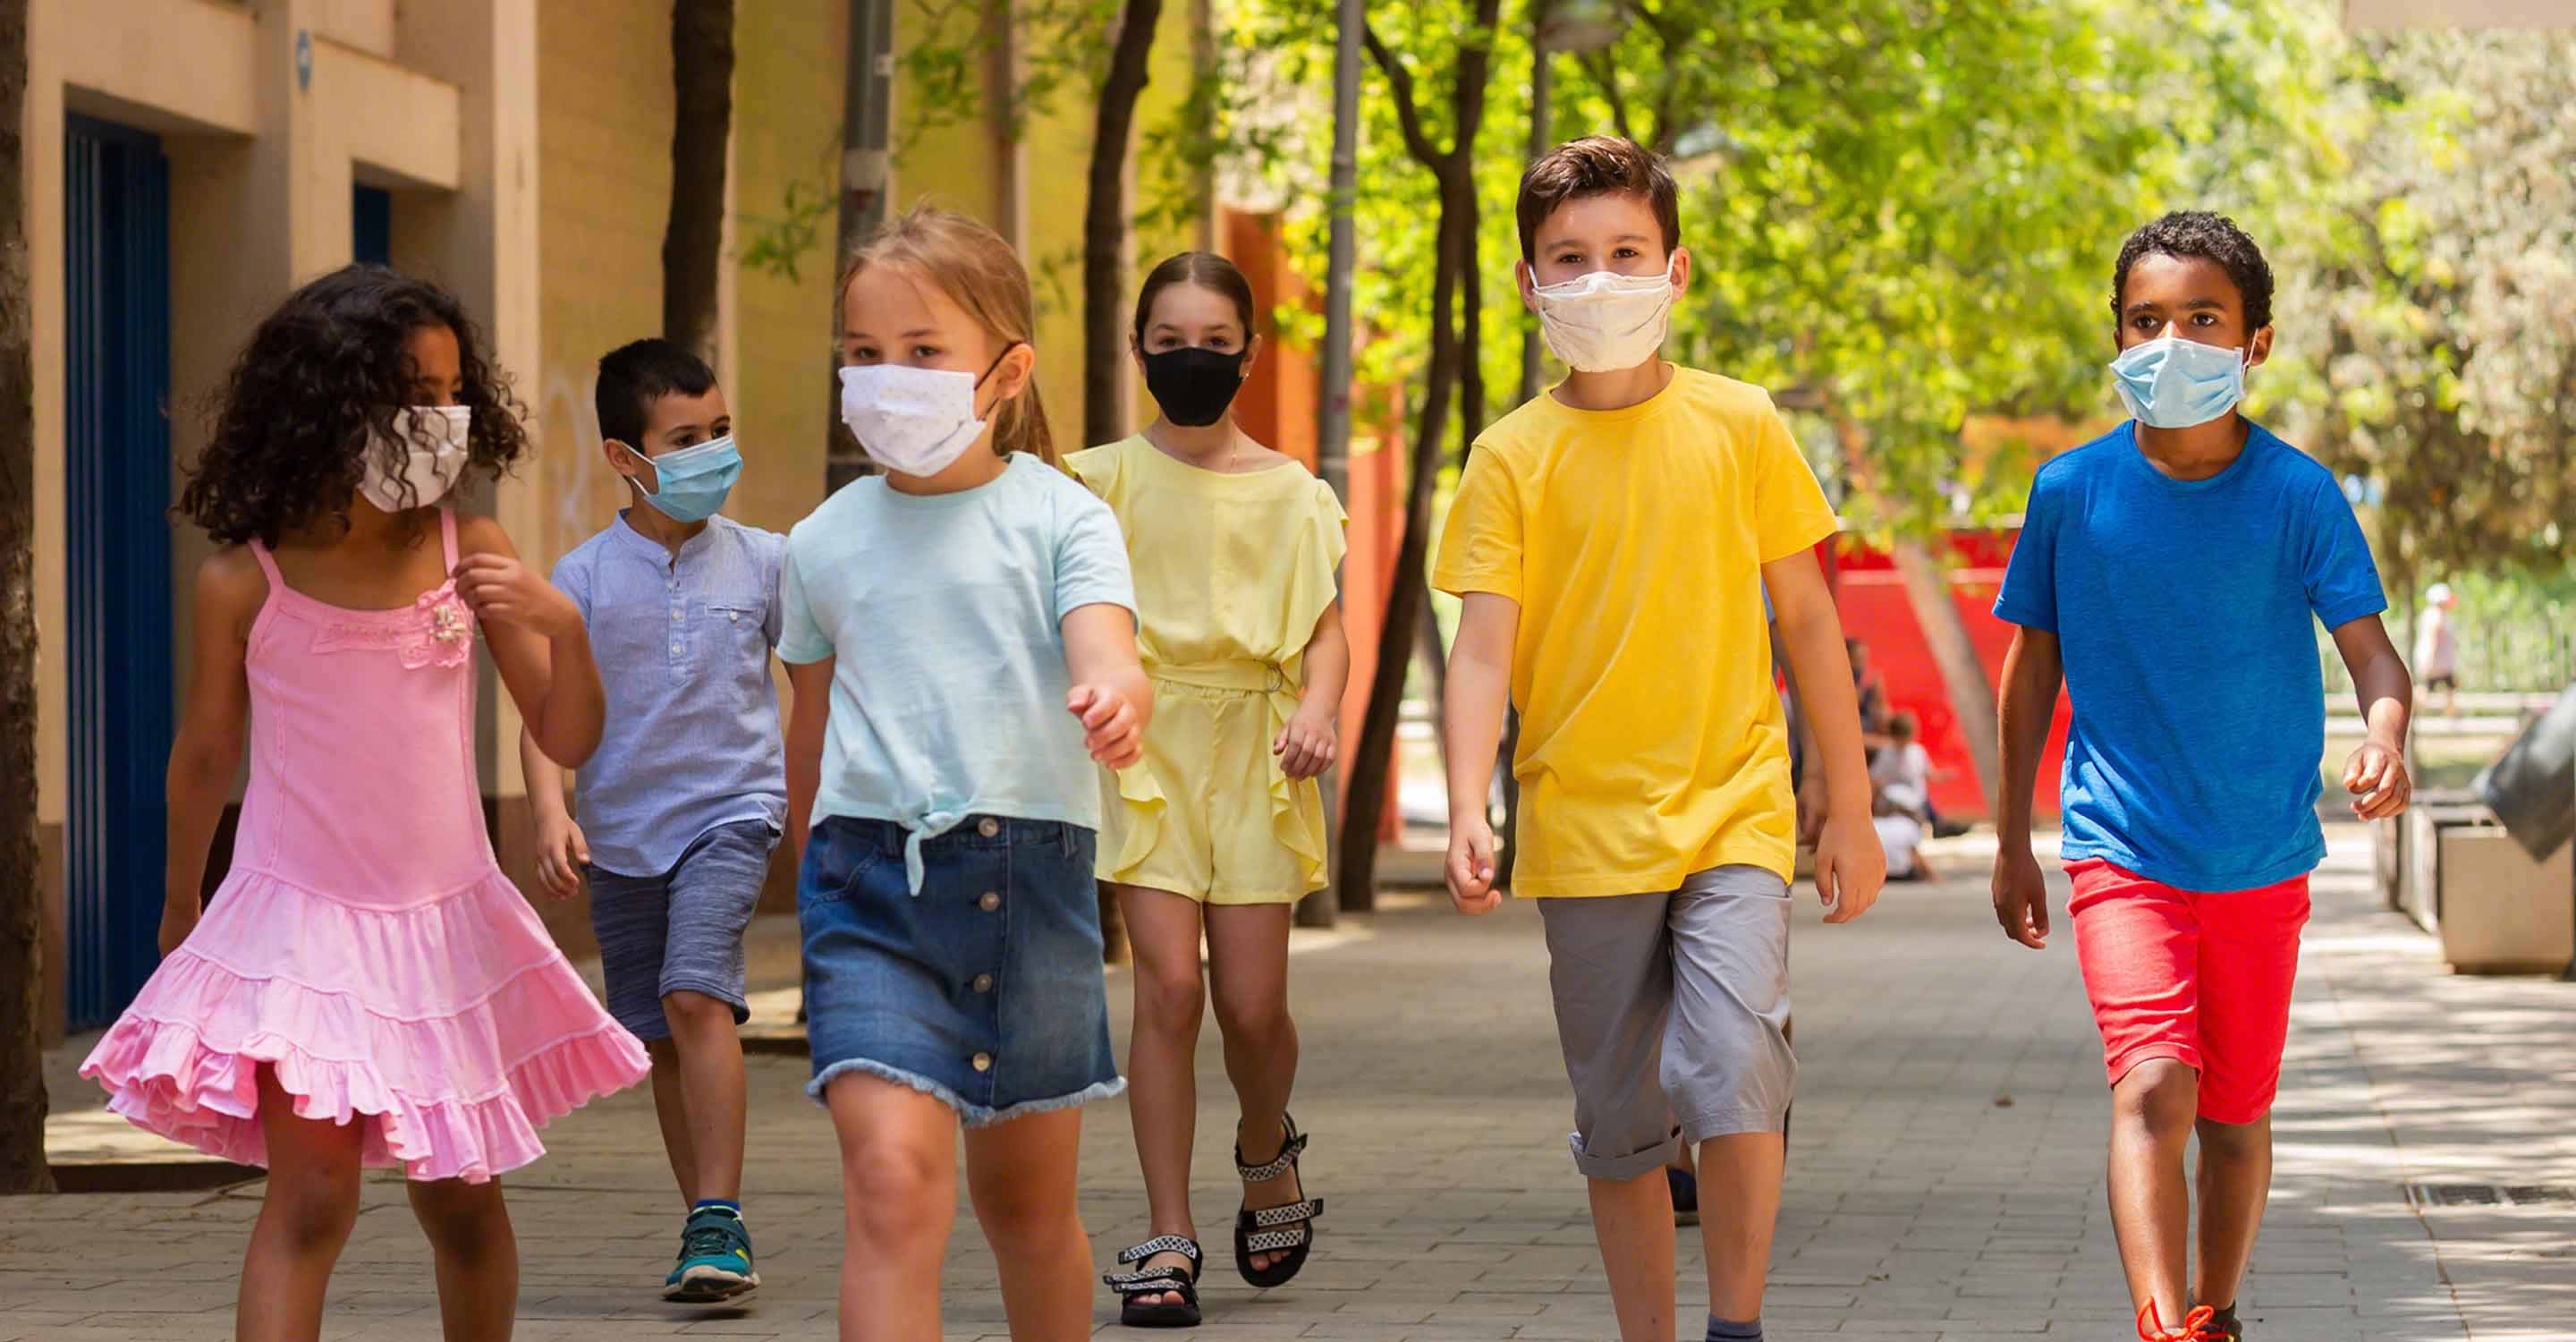 Air pollution masks: What works, what doesn't